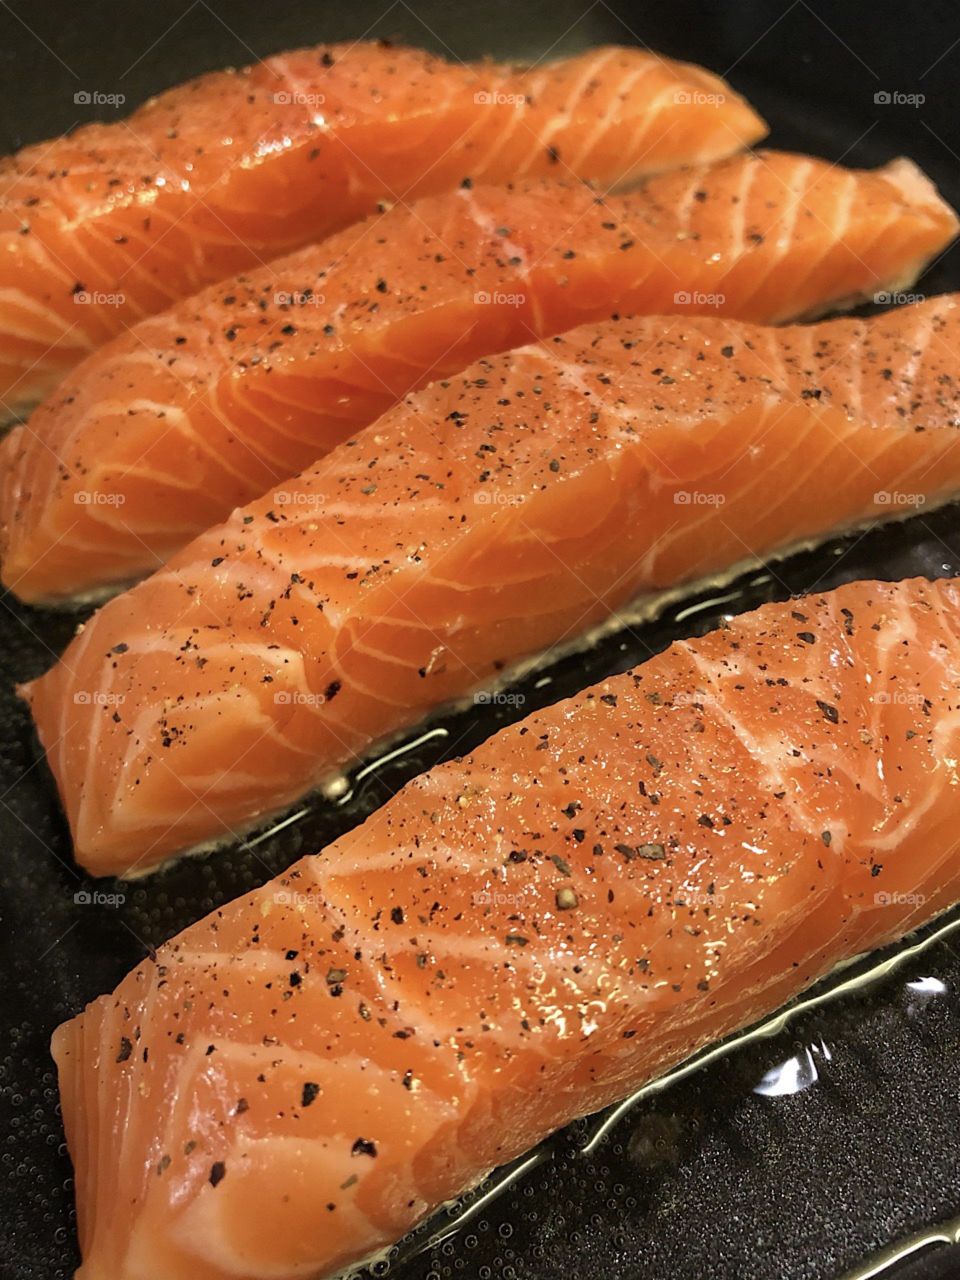 Delicious grilled salmon dinner. 